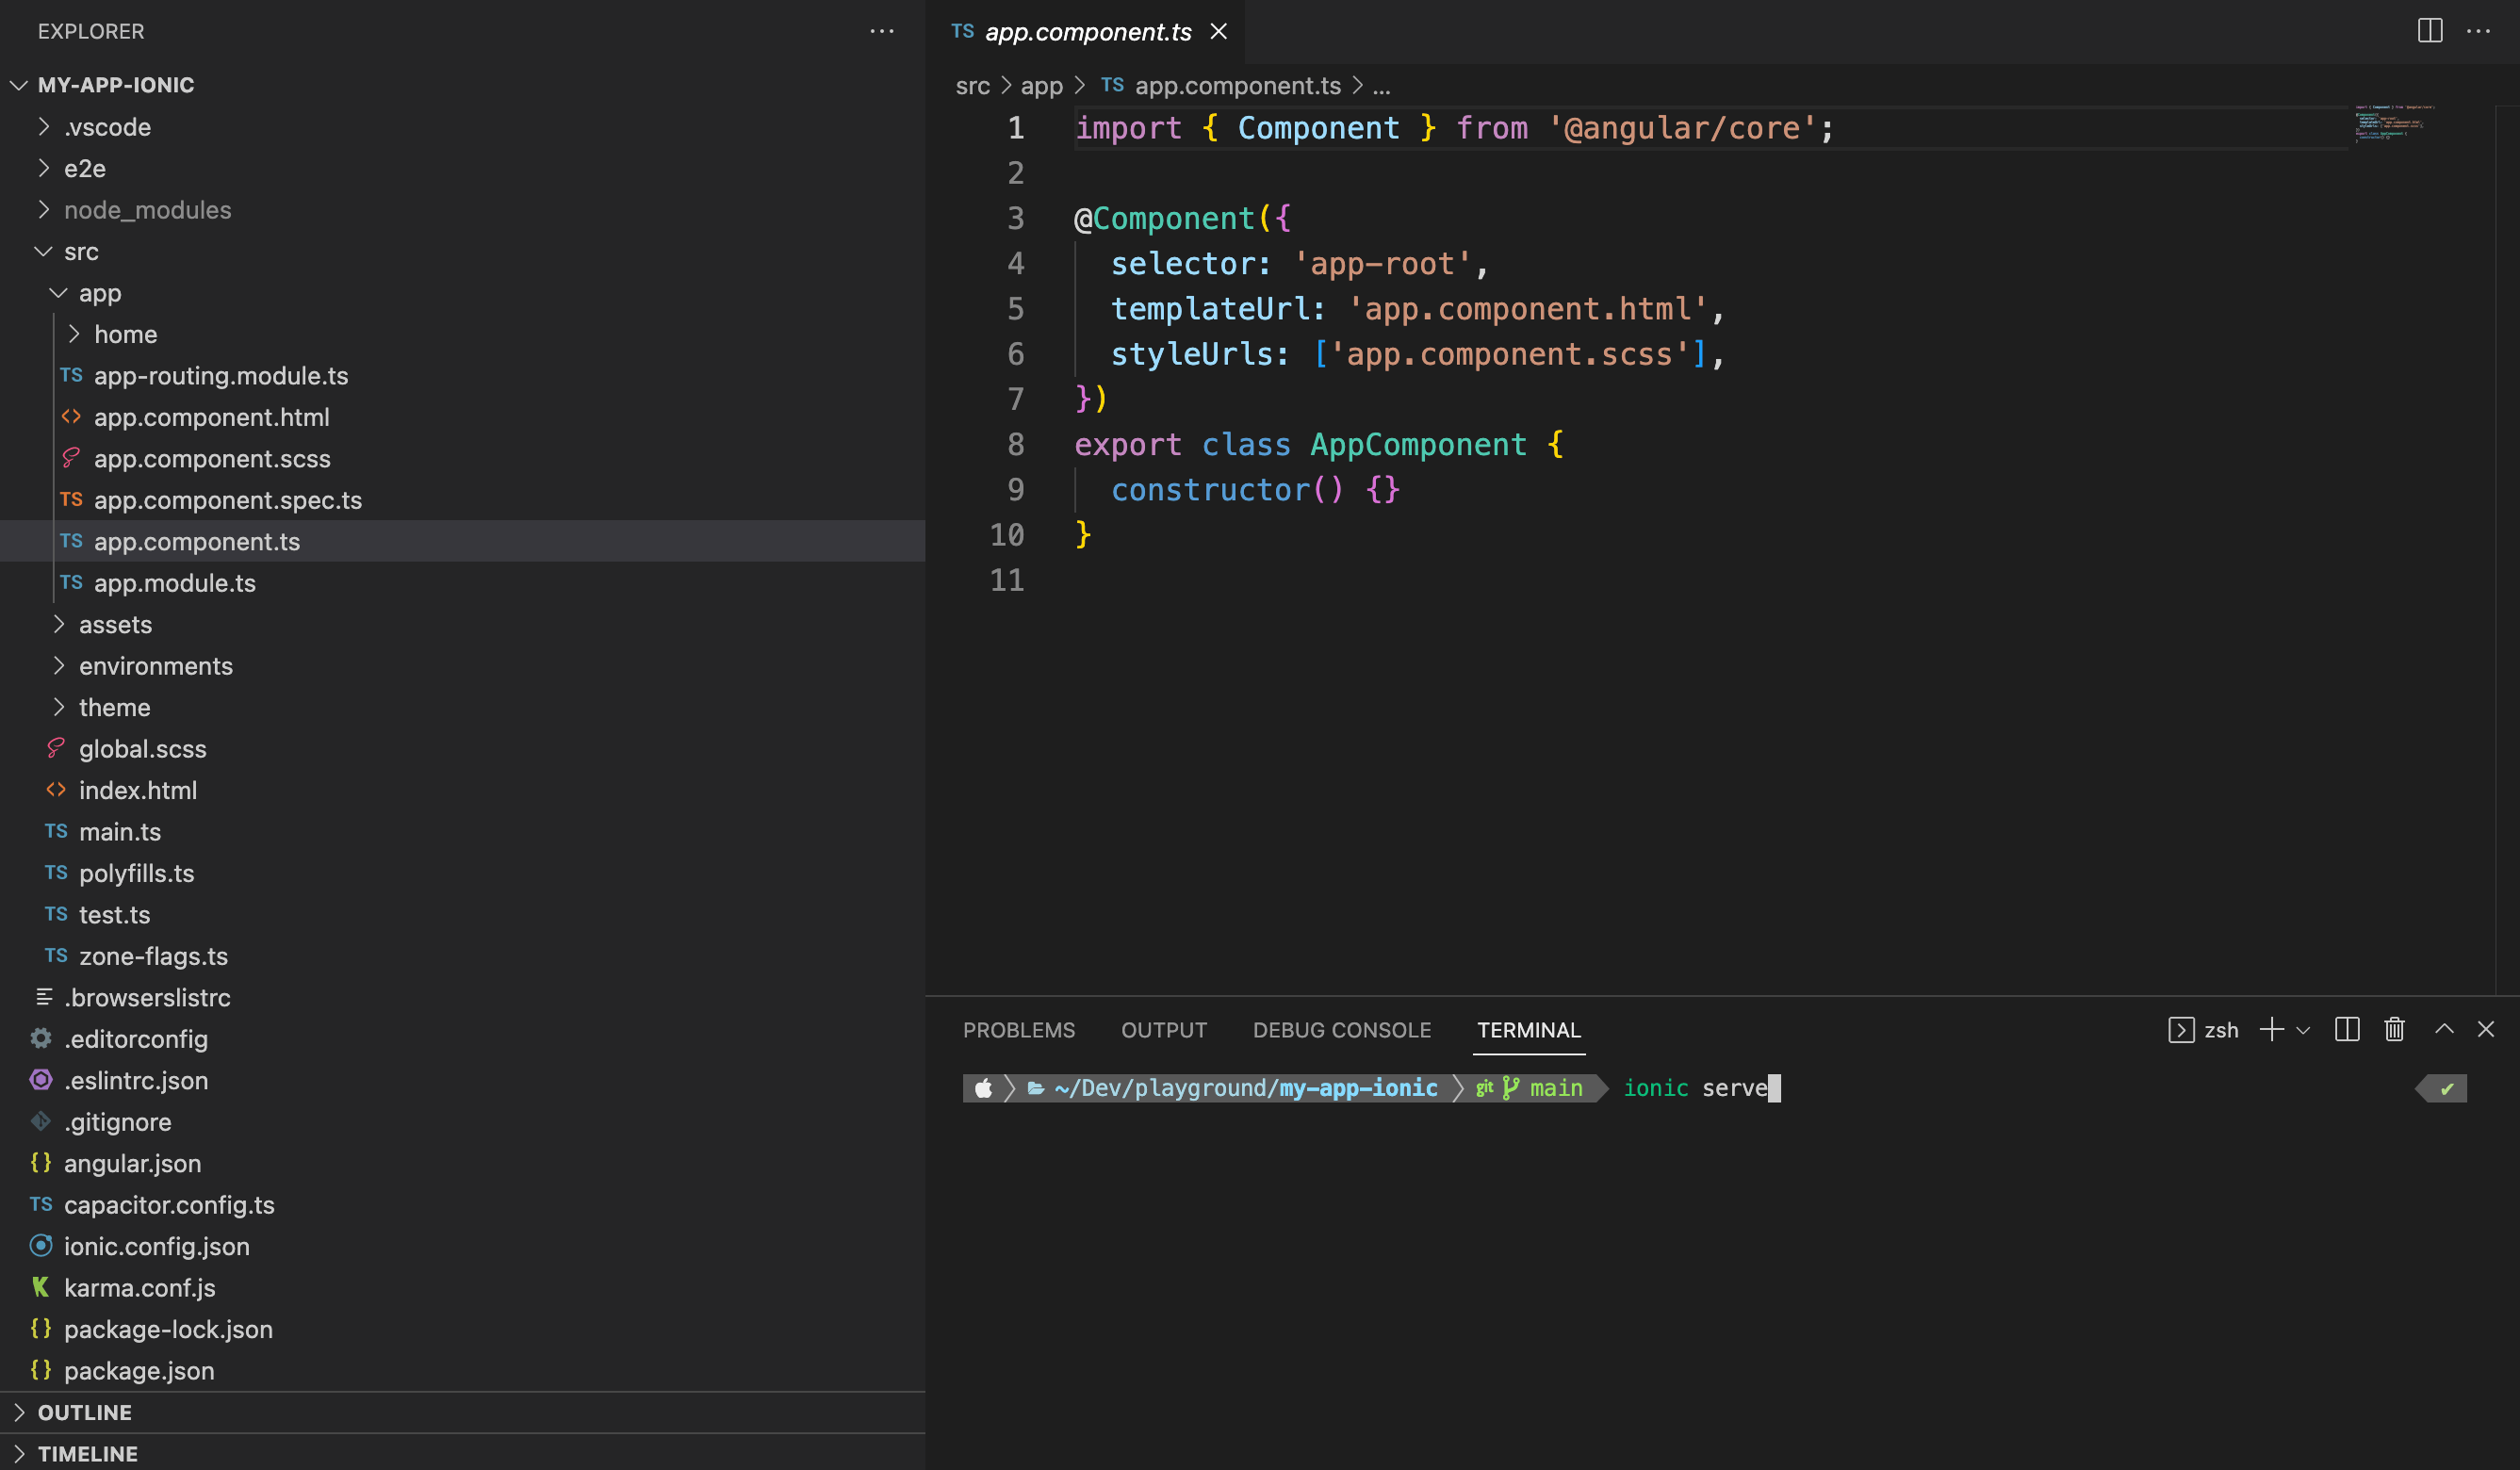 VS Code with Ionic project open